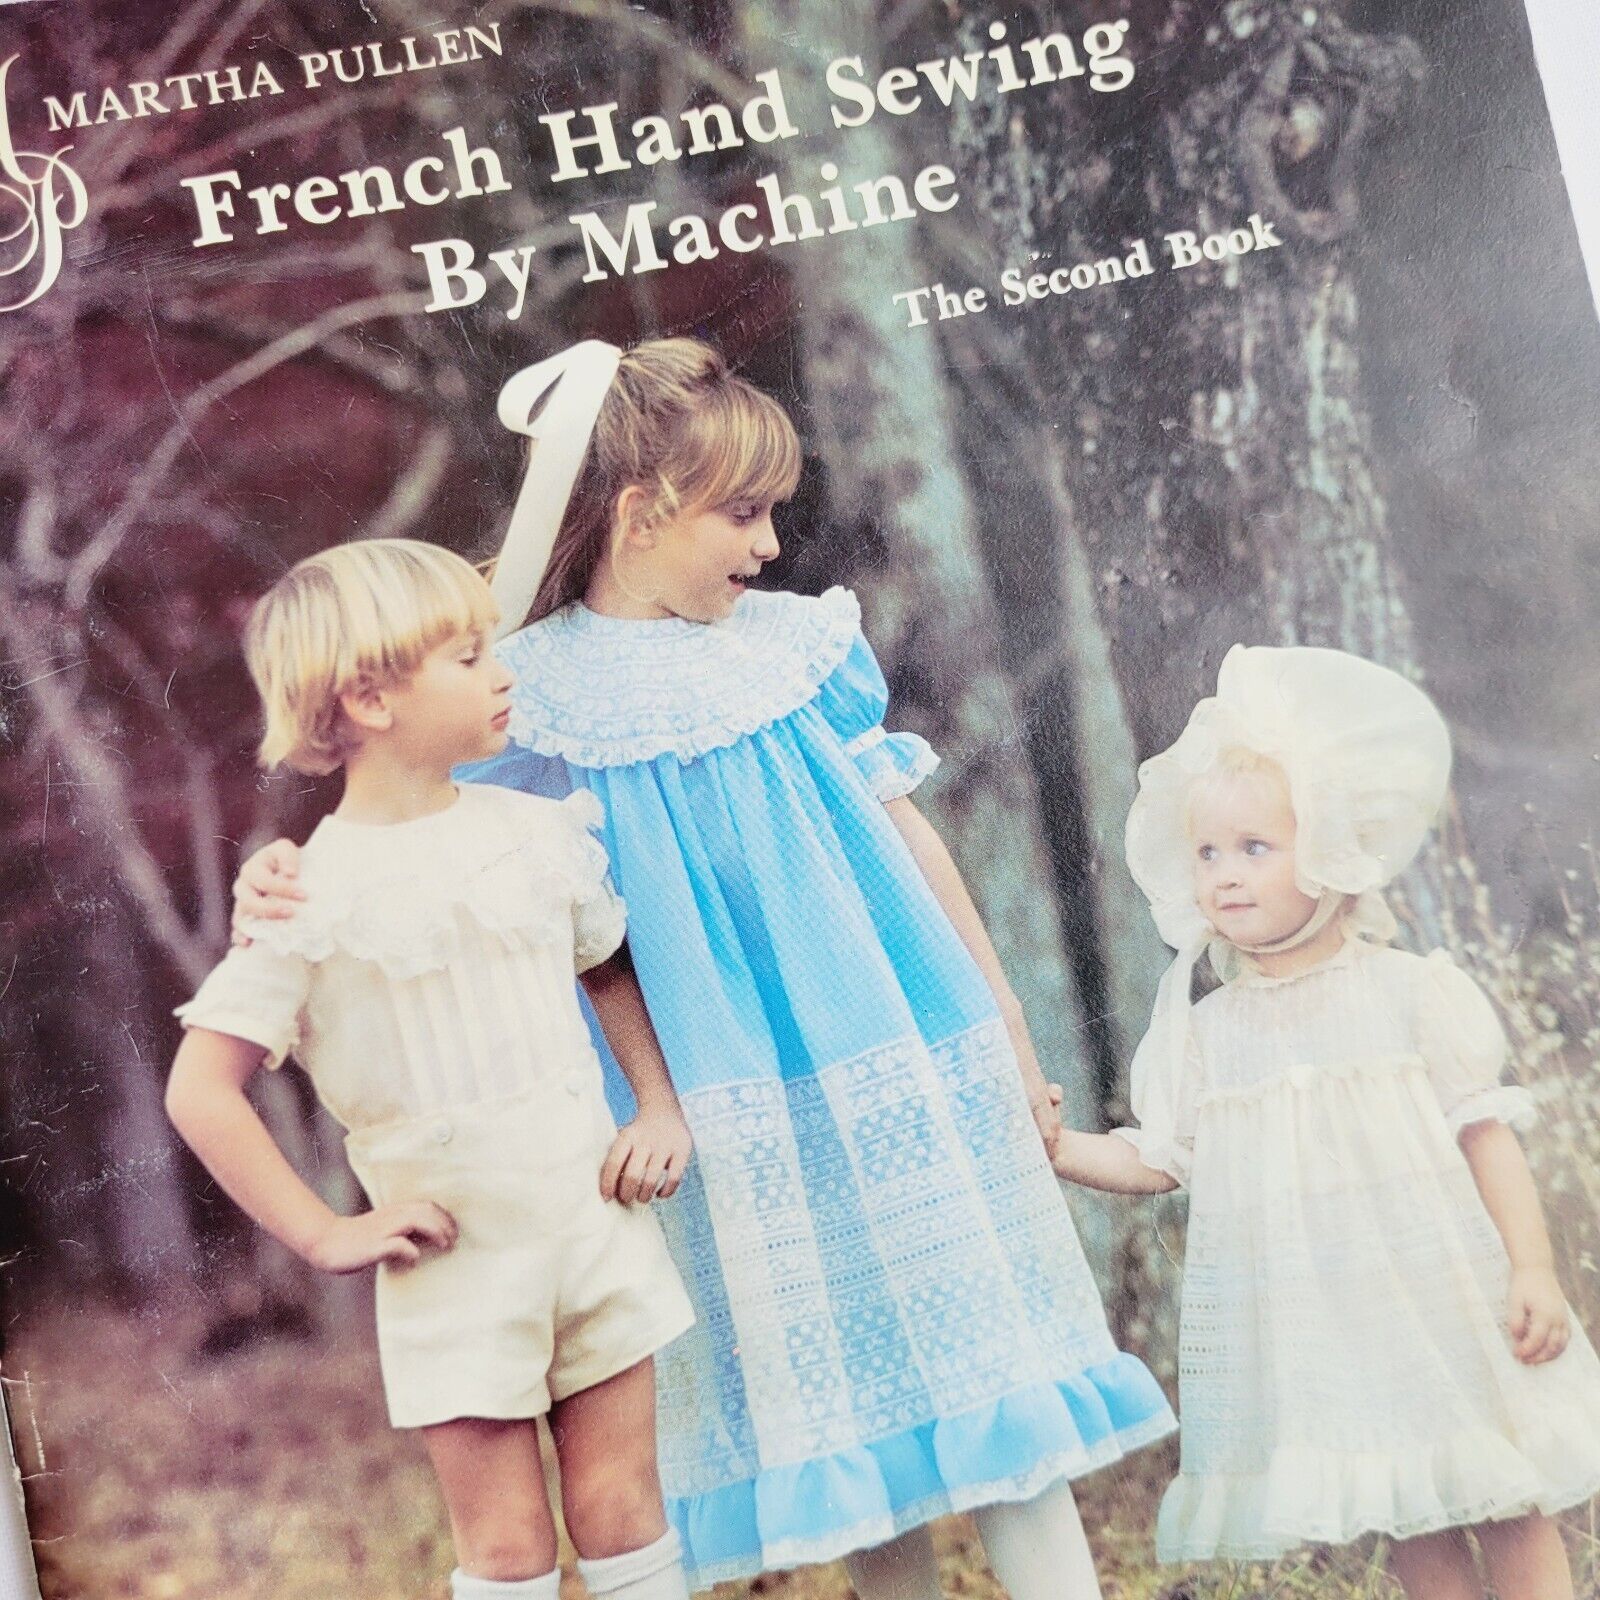 French Hand Sewing By Machine Booklet by Martha Pullen 1985